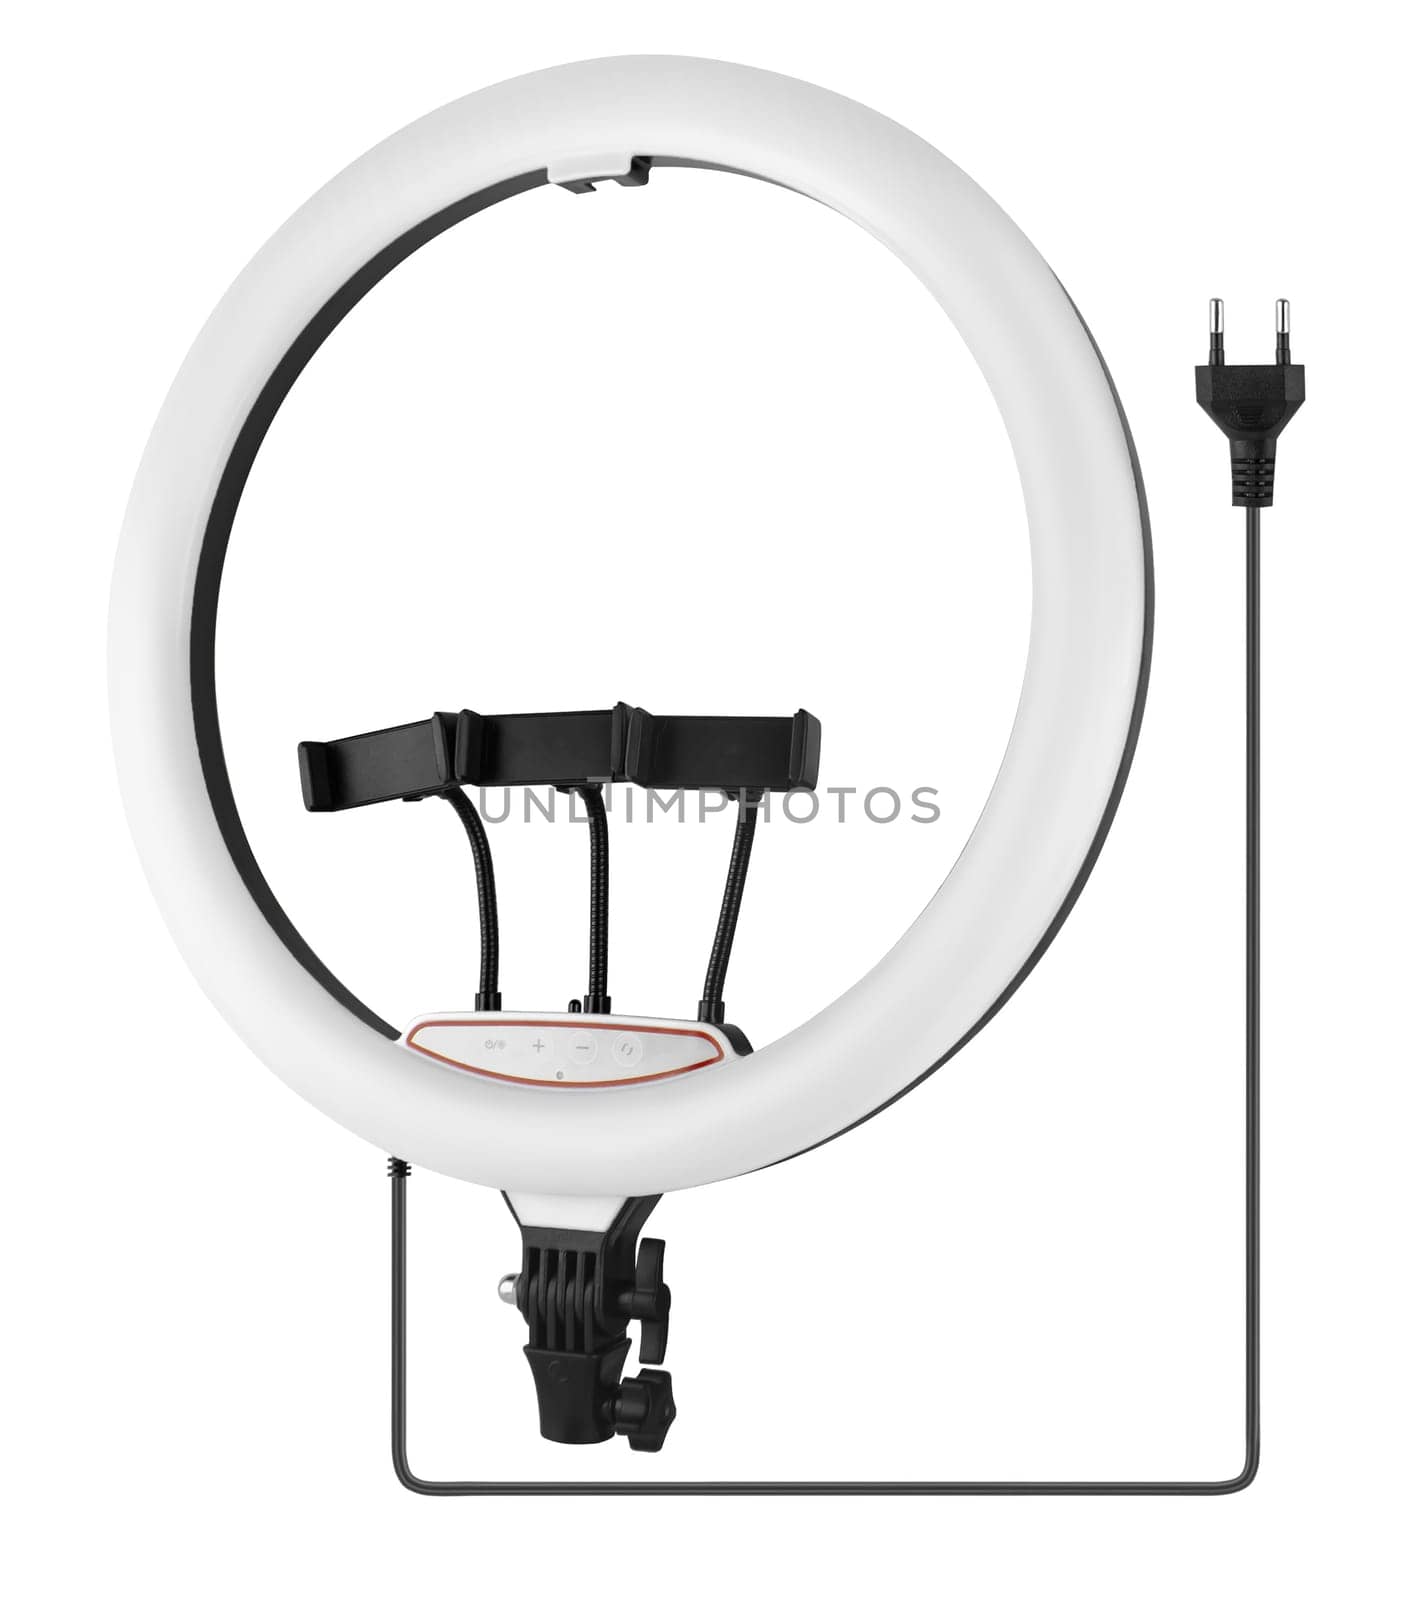 LED ring light, for selfies, with phone holder, white background by A_A